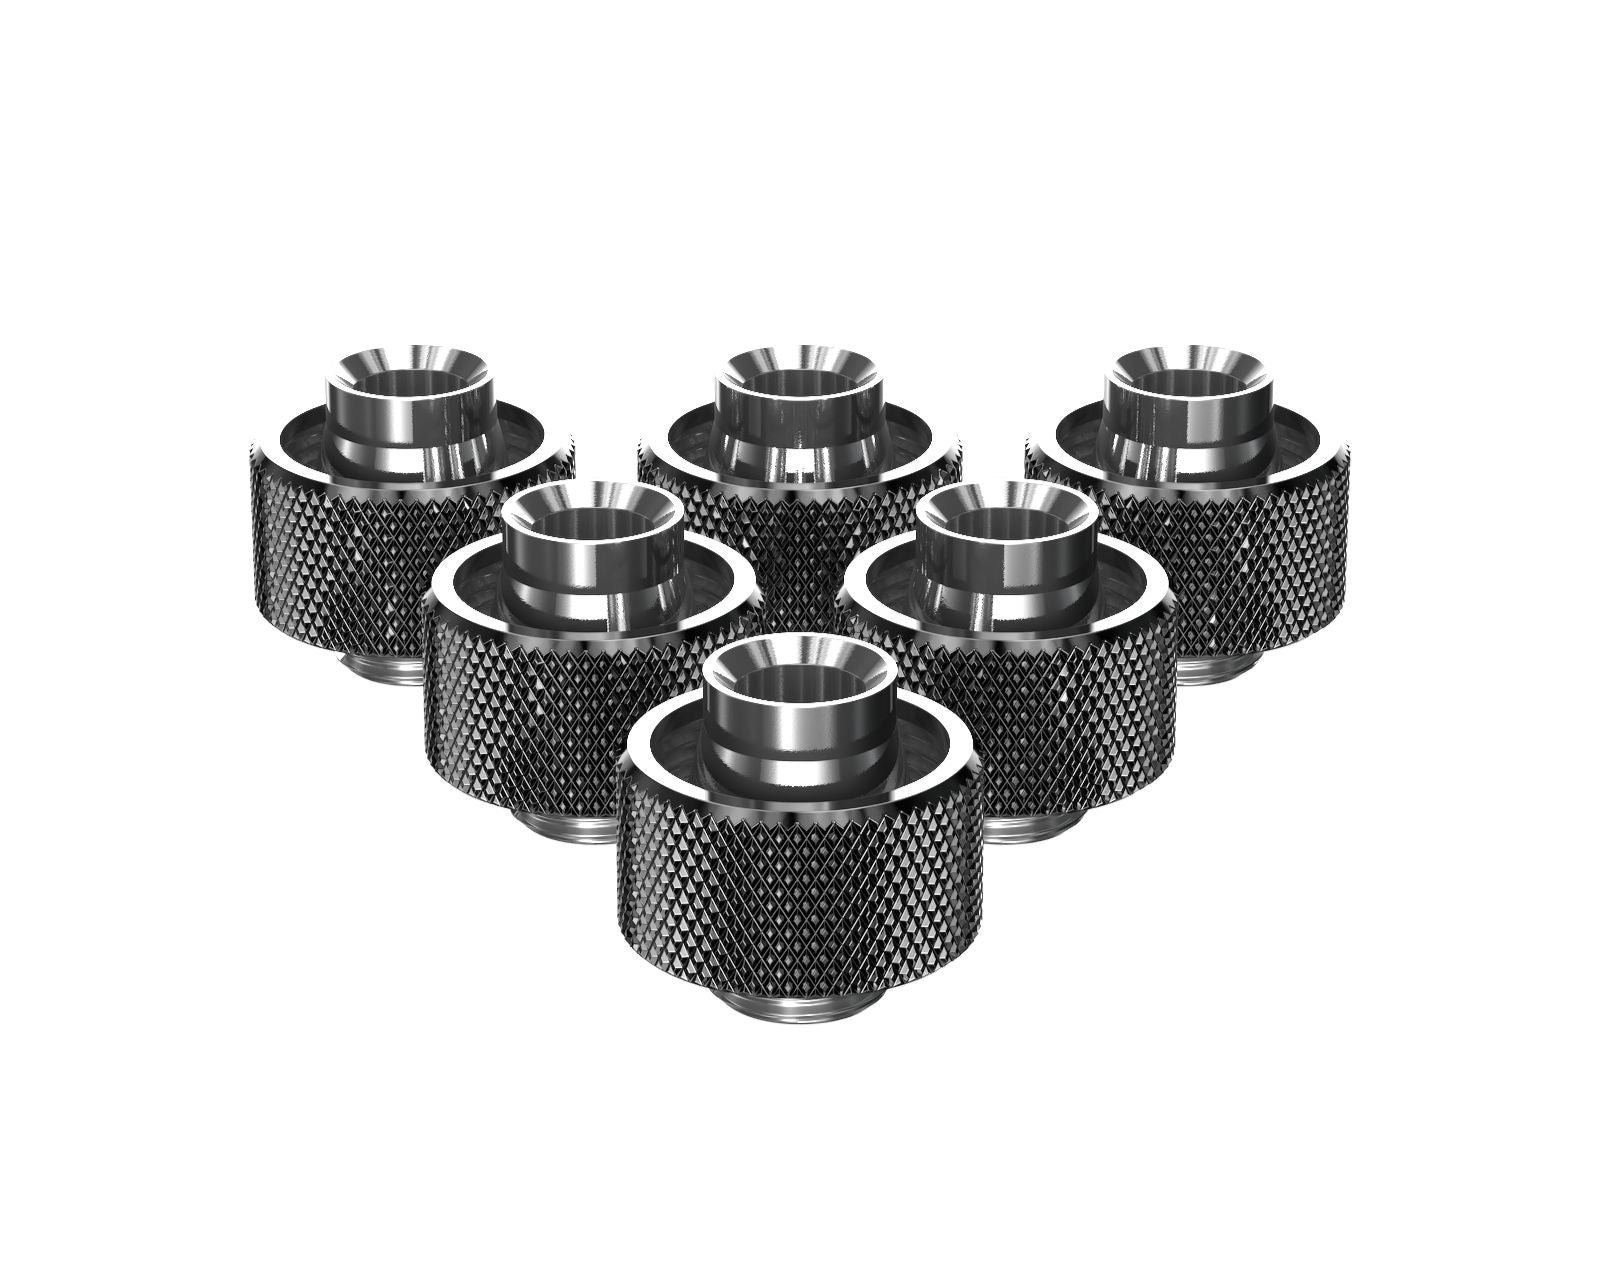 PrimoChill SecureFit SX - Premium Compression Fittings 6 Pack - For 1/2in ID x 3/4in OD Flexible Tubing (F-SFSX34-6) - Available in 20+ Colors, Custom Watercooling Loop Ready - Dark Nickel